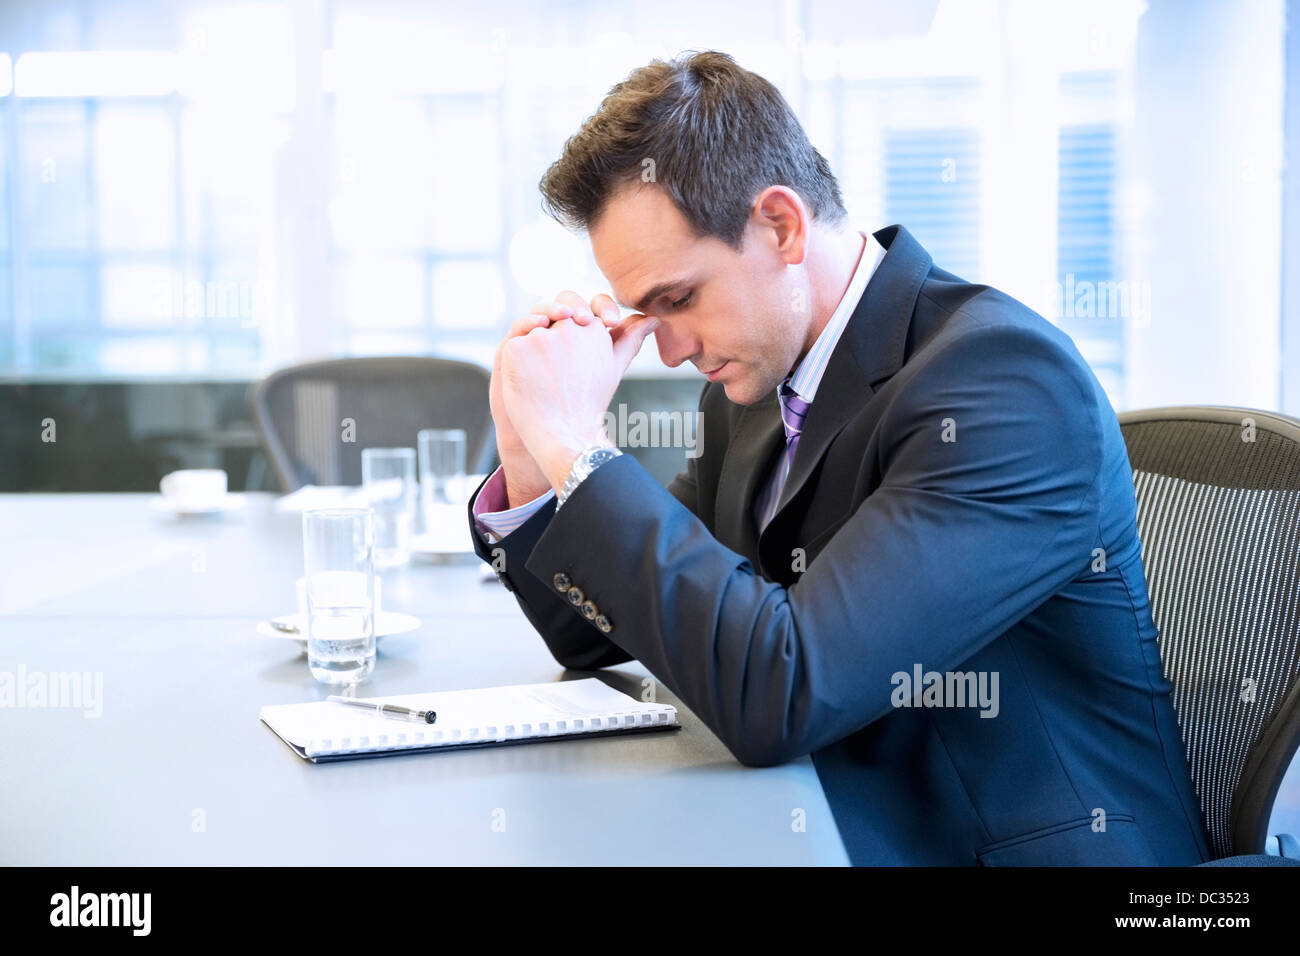 Businessman with head in hands in conference room Banque D'Images